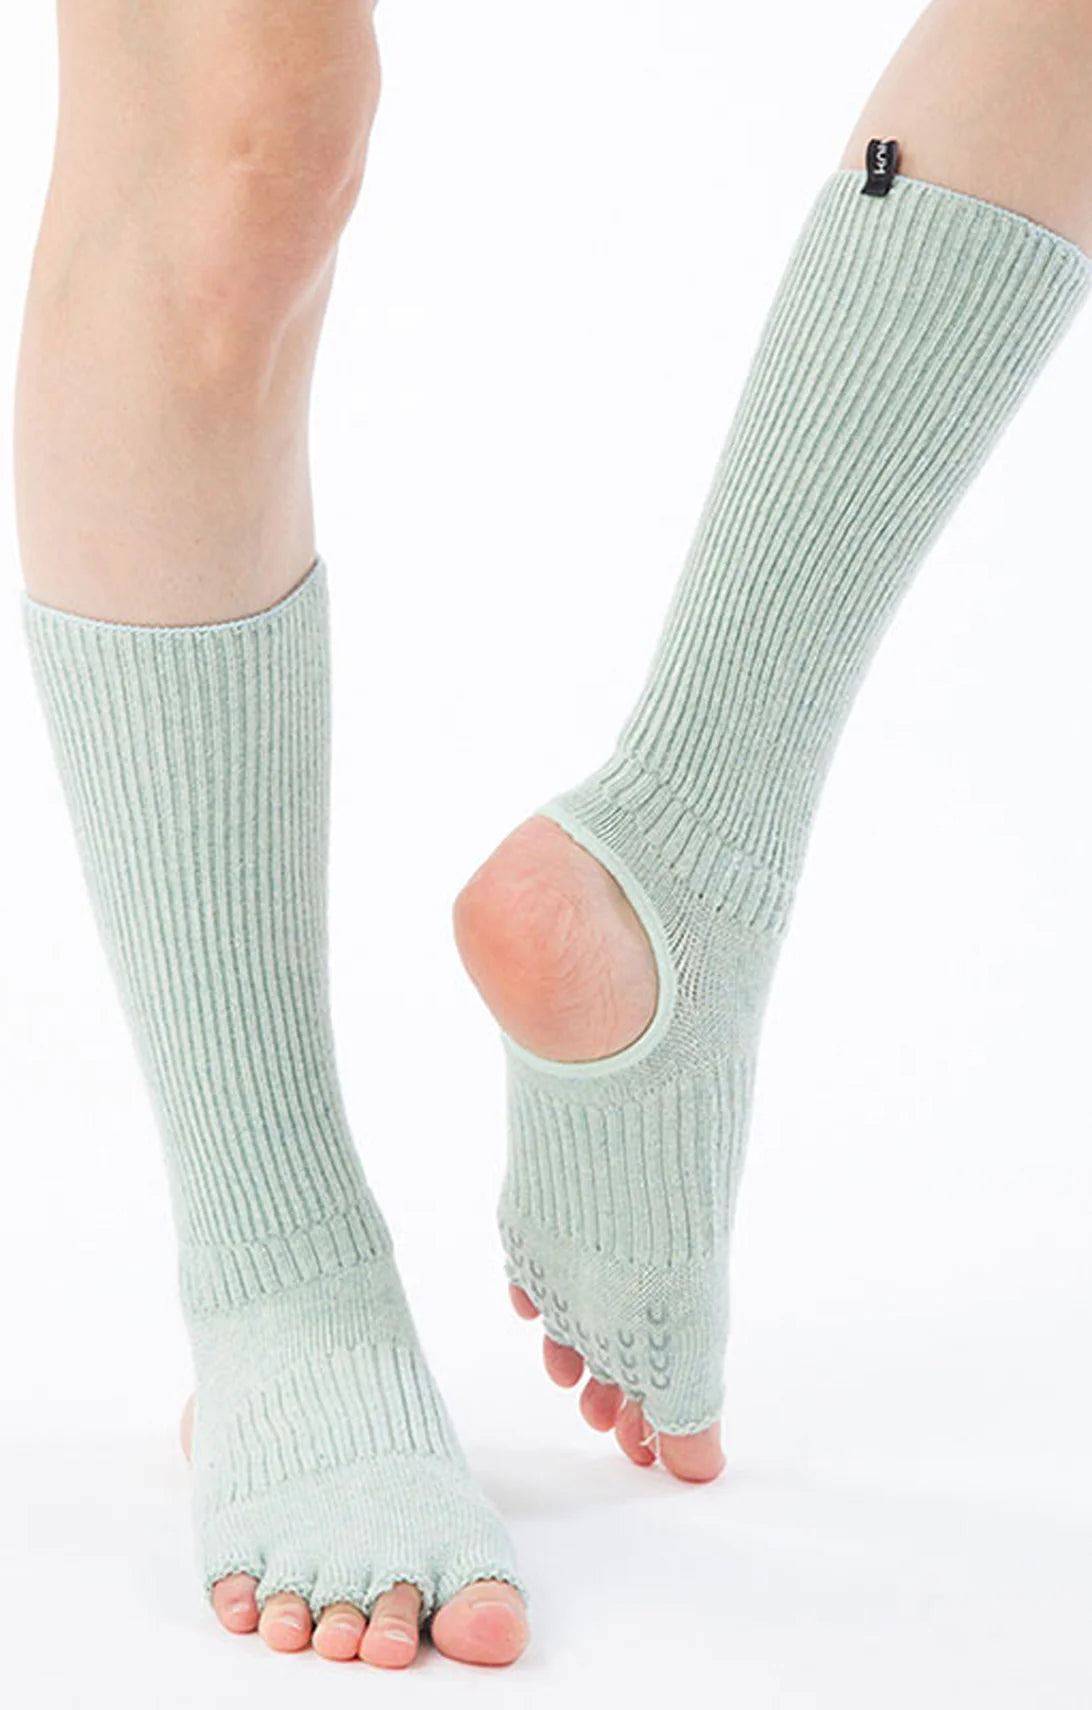 Front view of a woman's leg wearing Knitido plus brand Organic Cotton Botanical Dyed Open Toe and Heel Grip Socks in Mint color